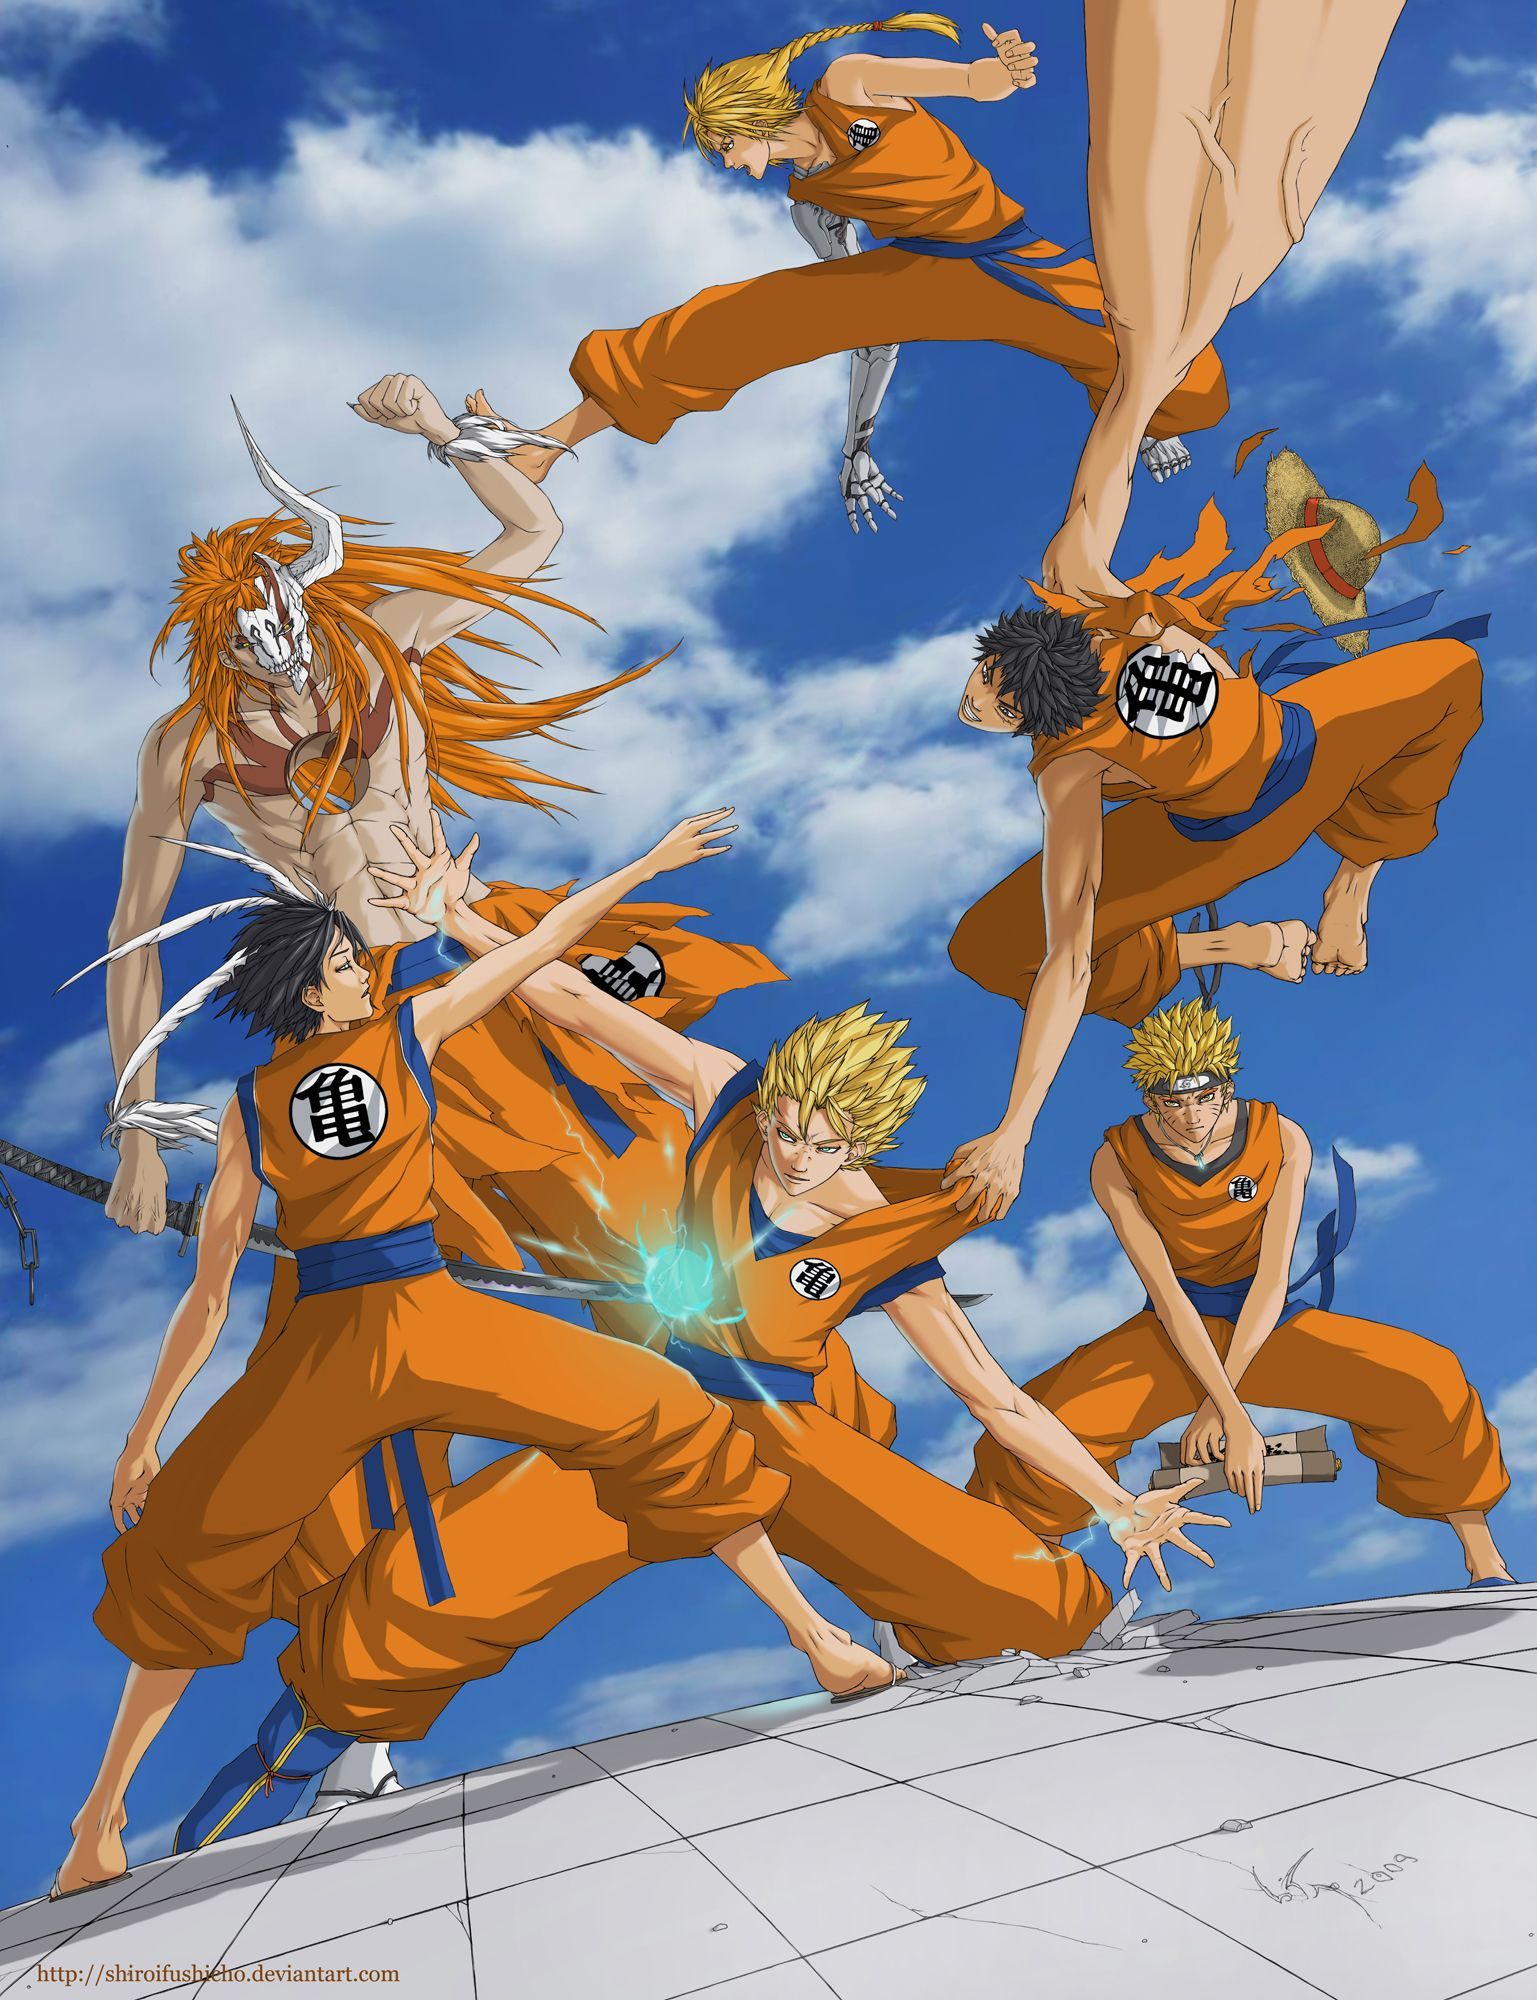 Ichigo = orange hair and horn, Edward = long blond hair and metal arm, Luffy = black hair and stretched arm, Naru. Anime fight, Anime crossover, Anime dragon ball